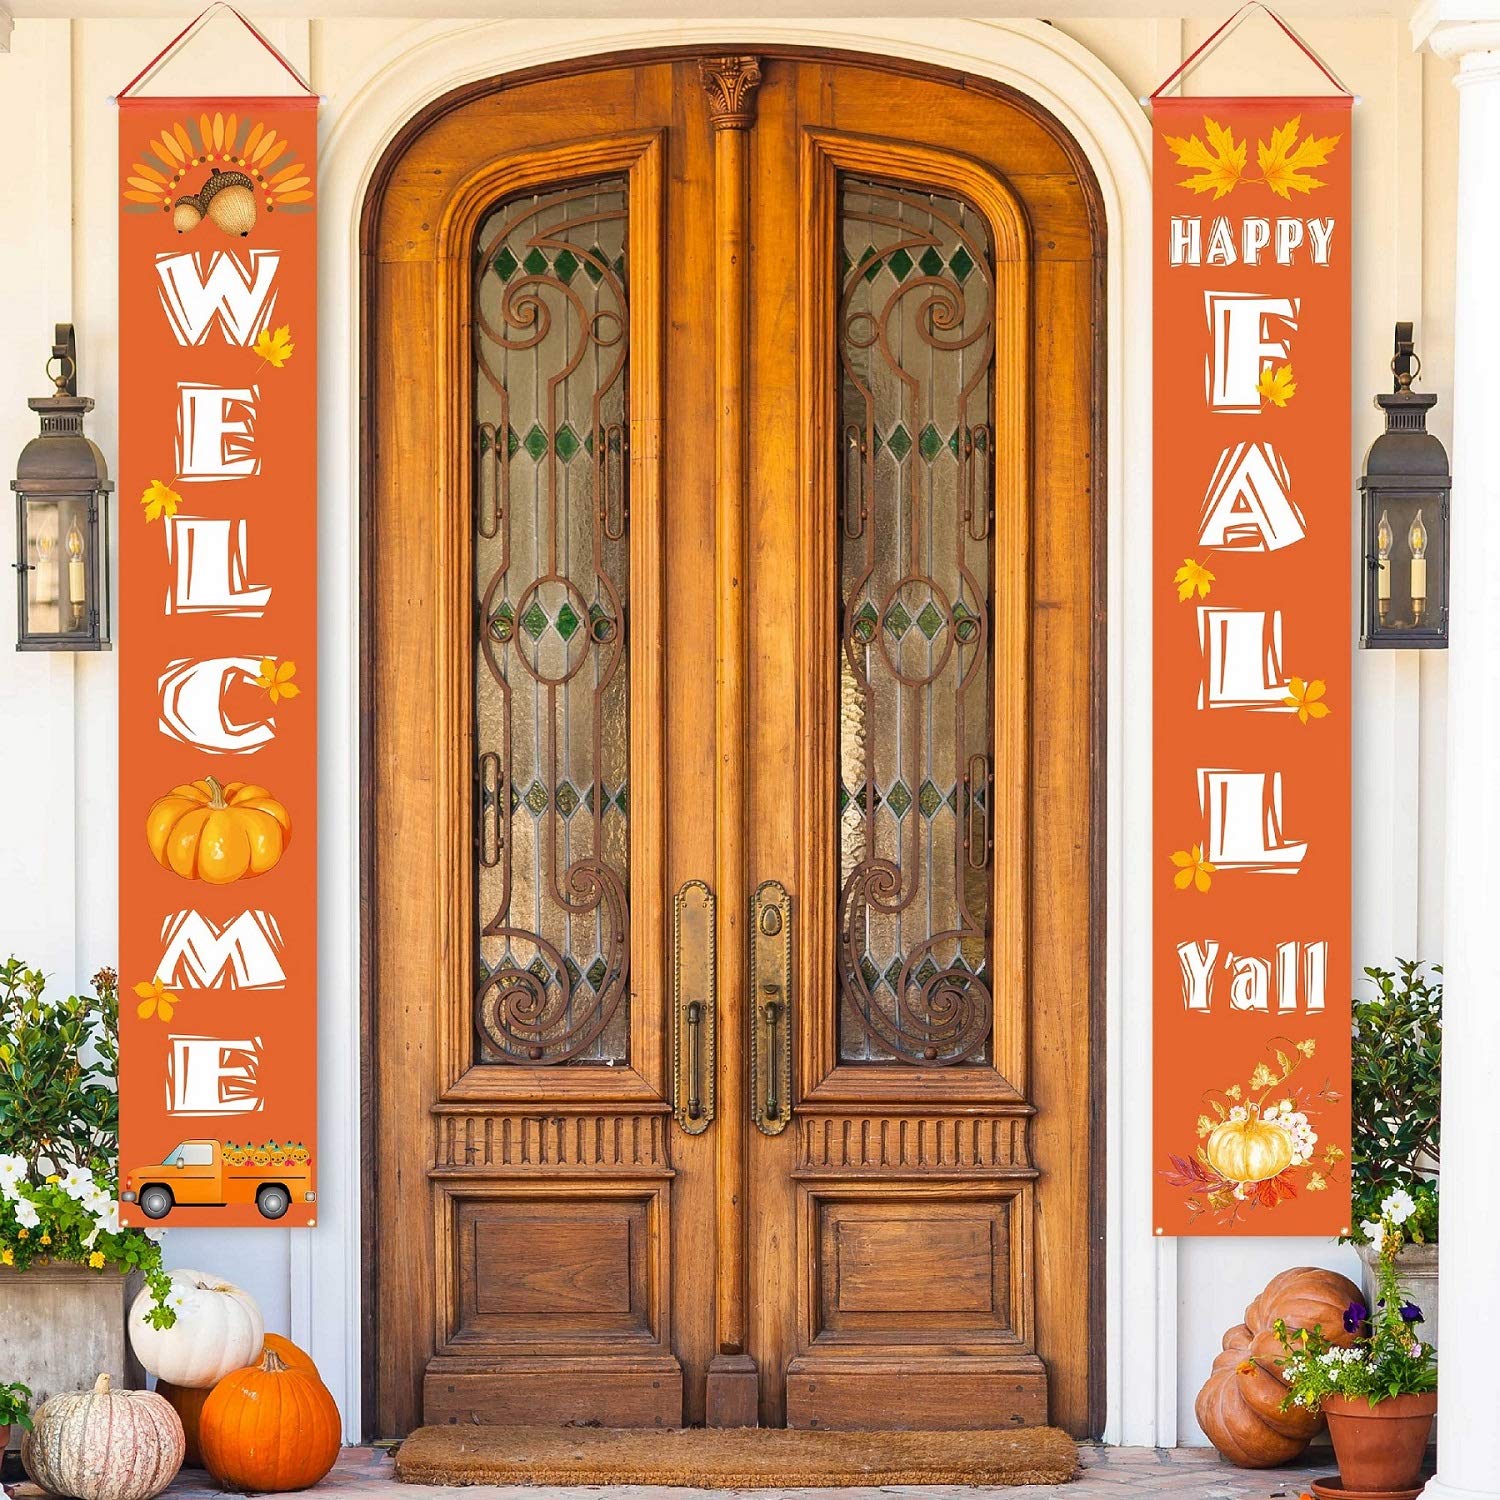 Welcome Happy Fall Y’all Banners